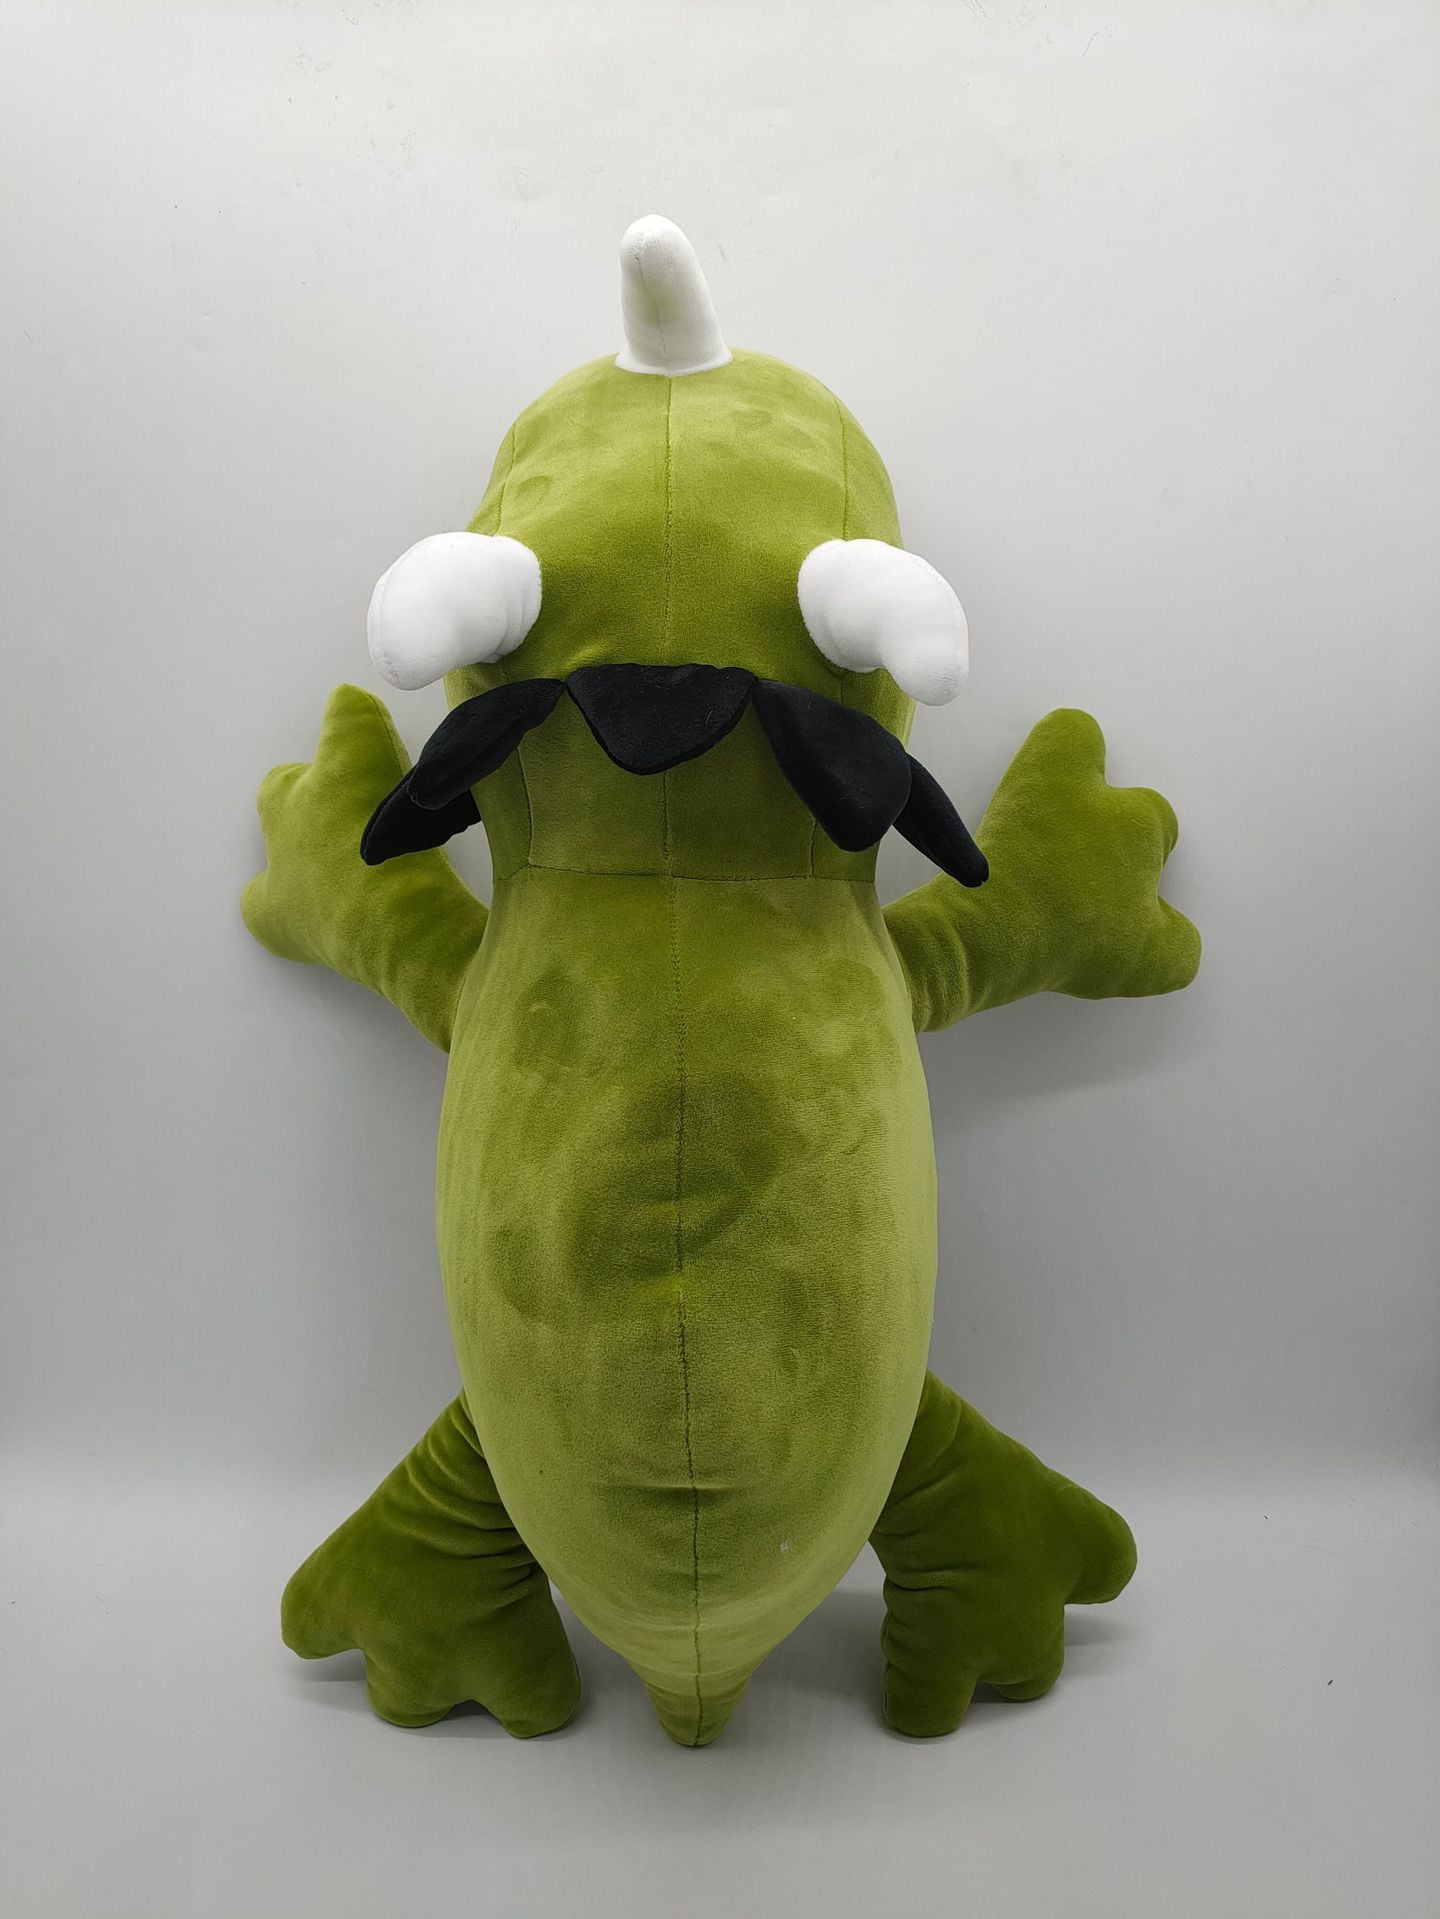 SQEQE Weighted Dinosaur Plush, Anxiety Weighted Stuffed Animals, Weighted